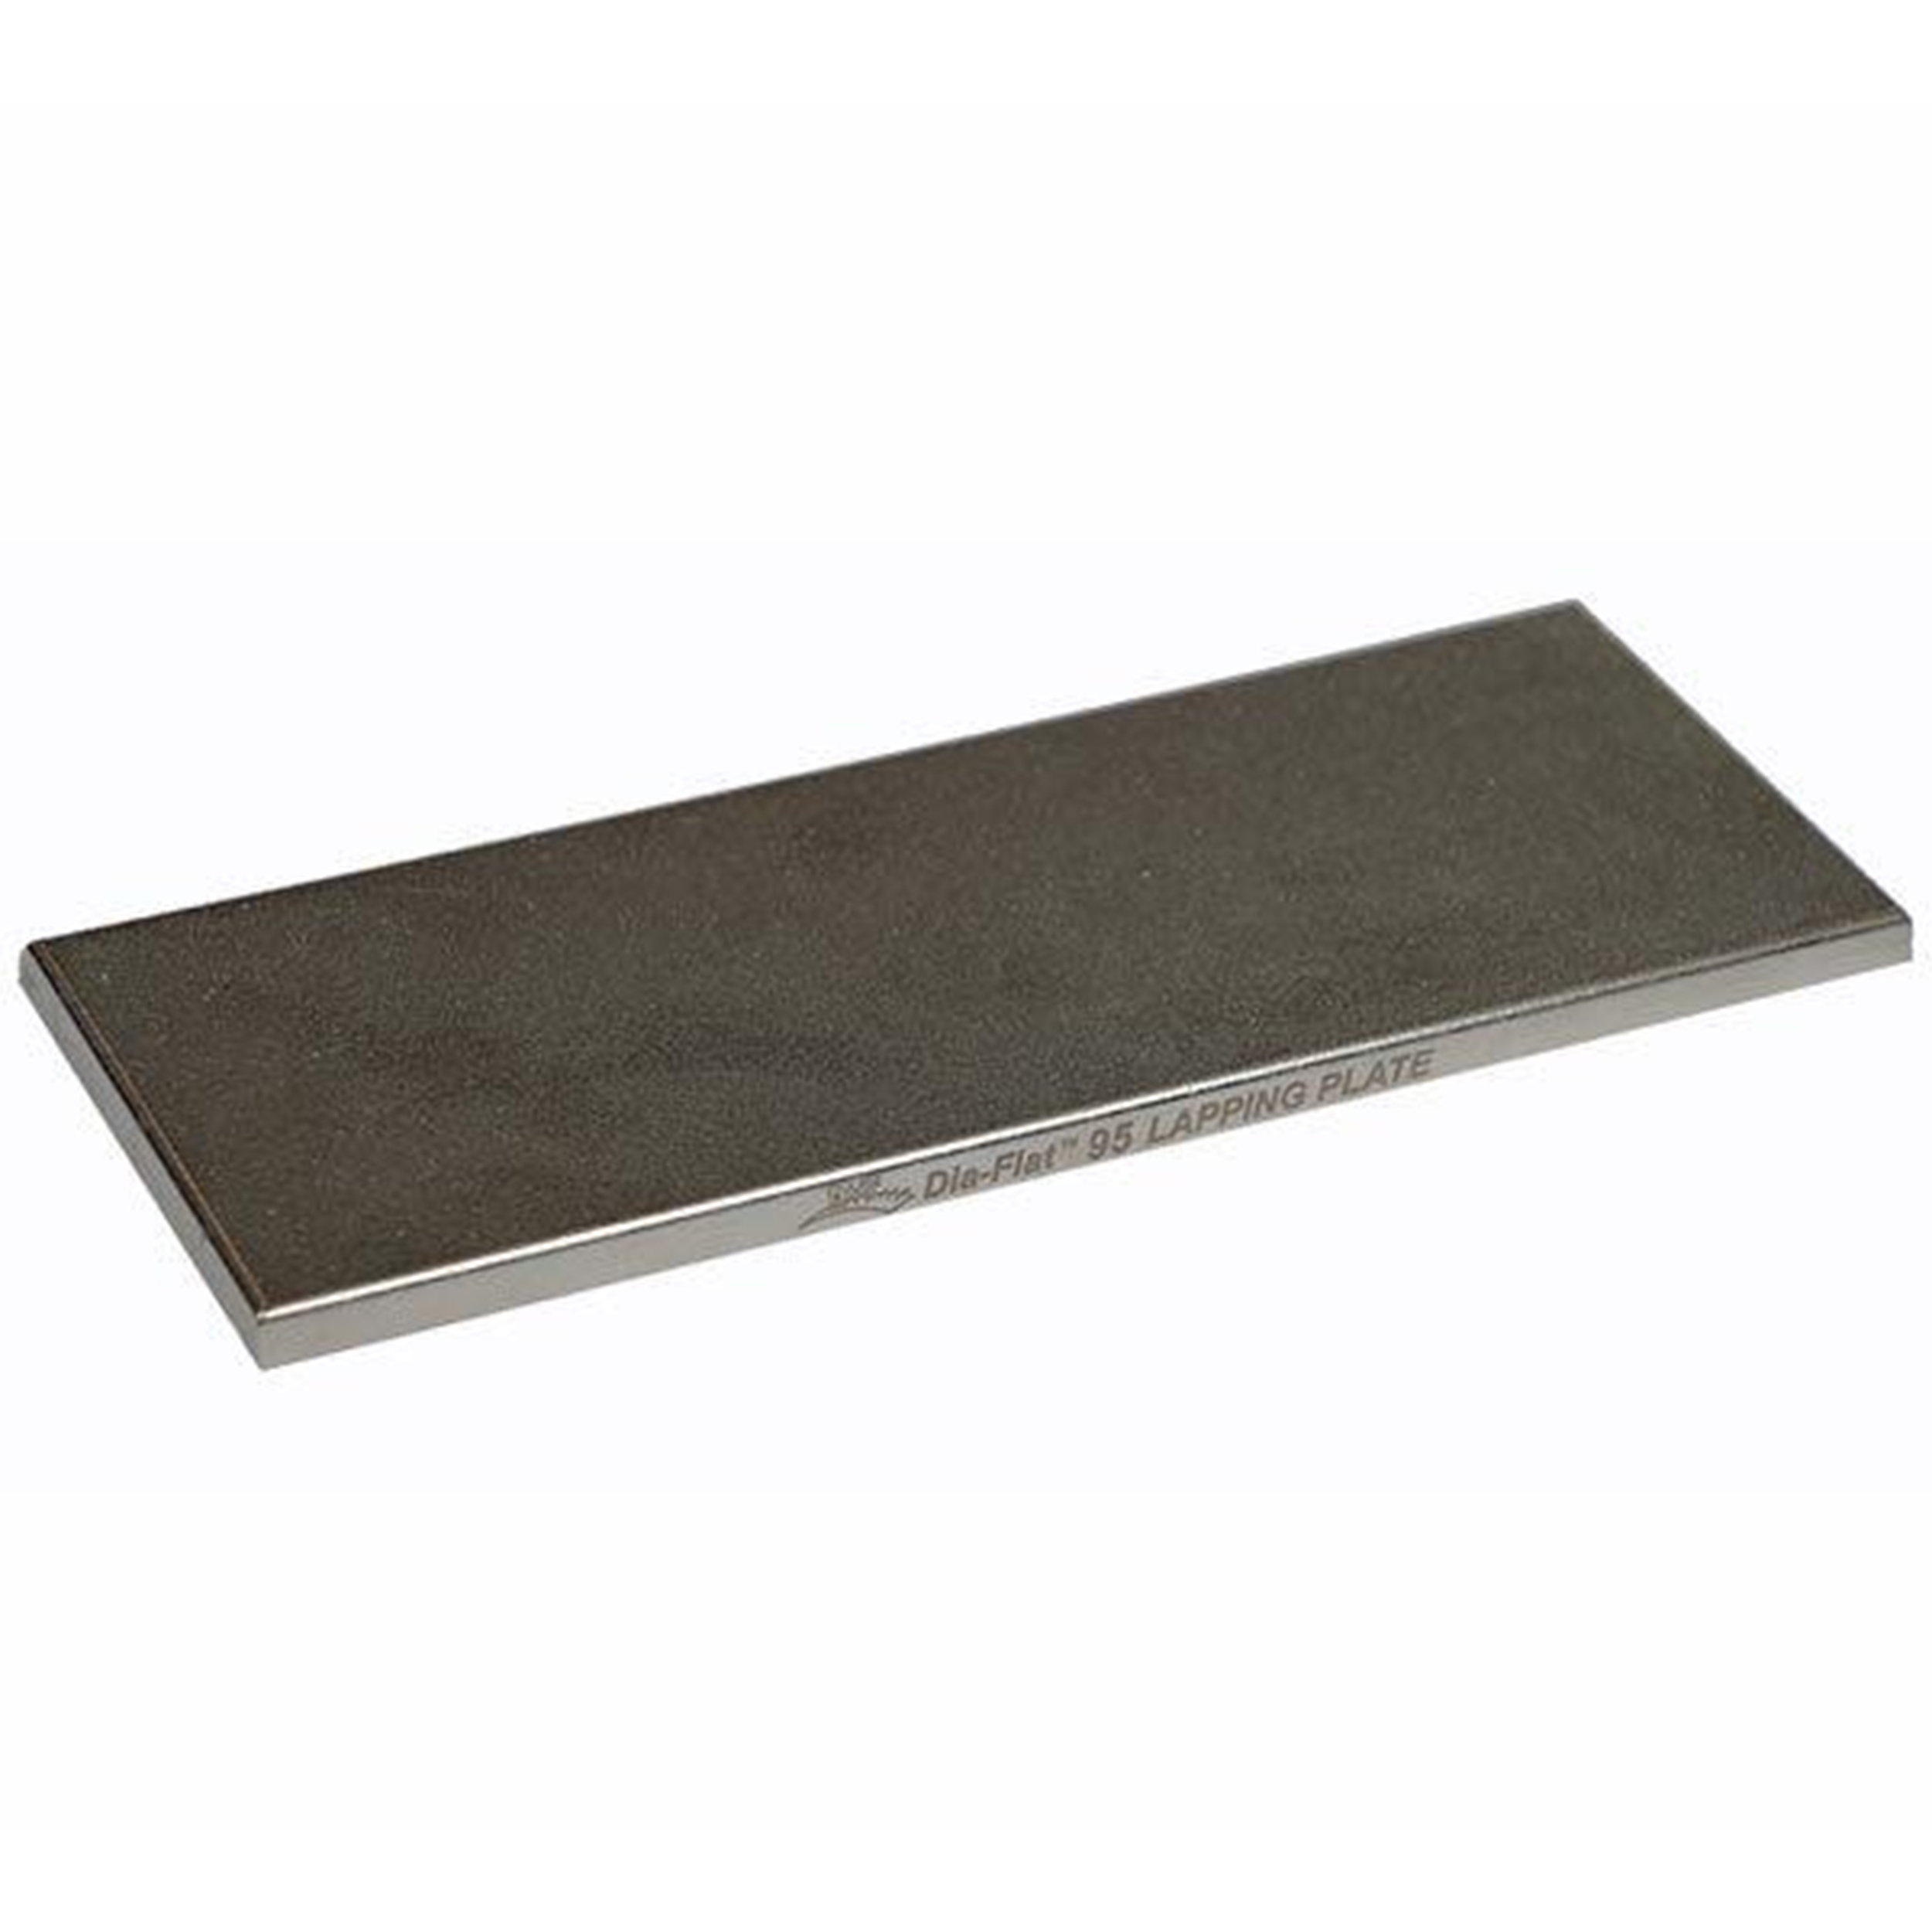 Diaflat-95 10" X 4" 160grit Lapping Plate